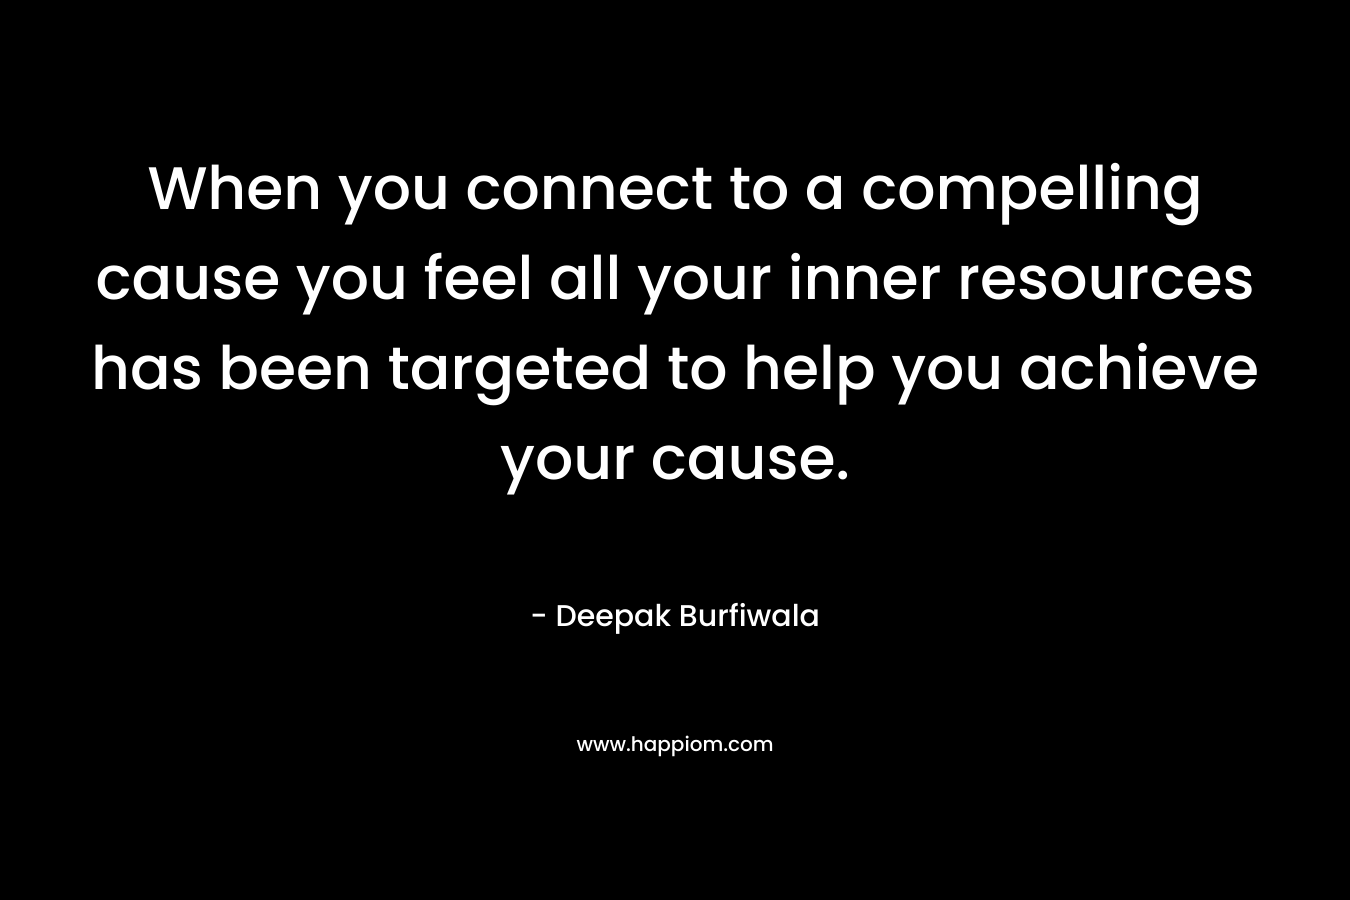 When you connect to a compelling cause you feel all your inner resources has been targeted to help you achieve your cause.